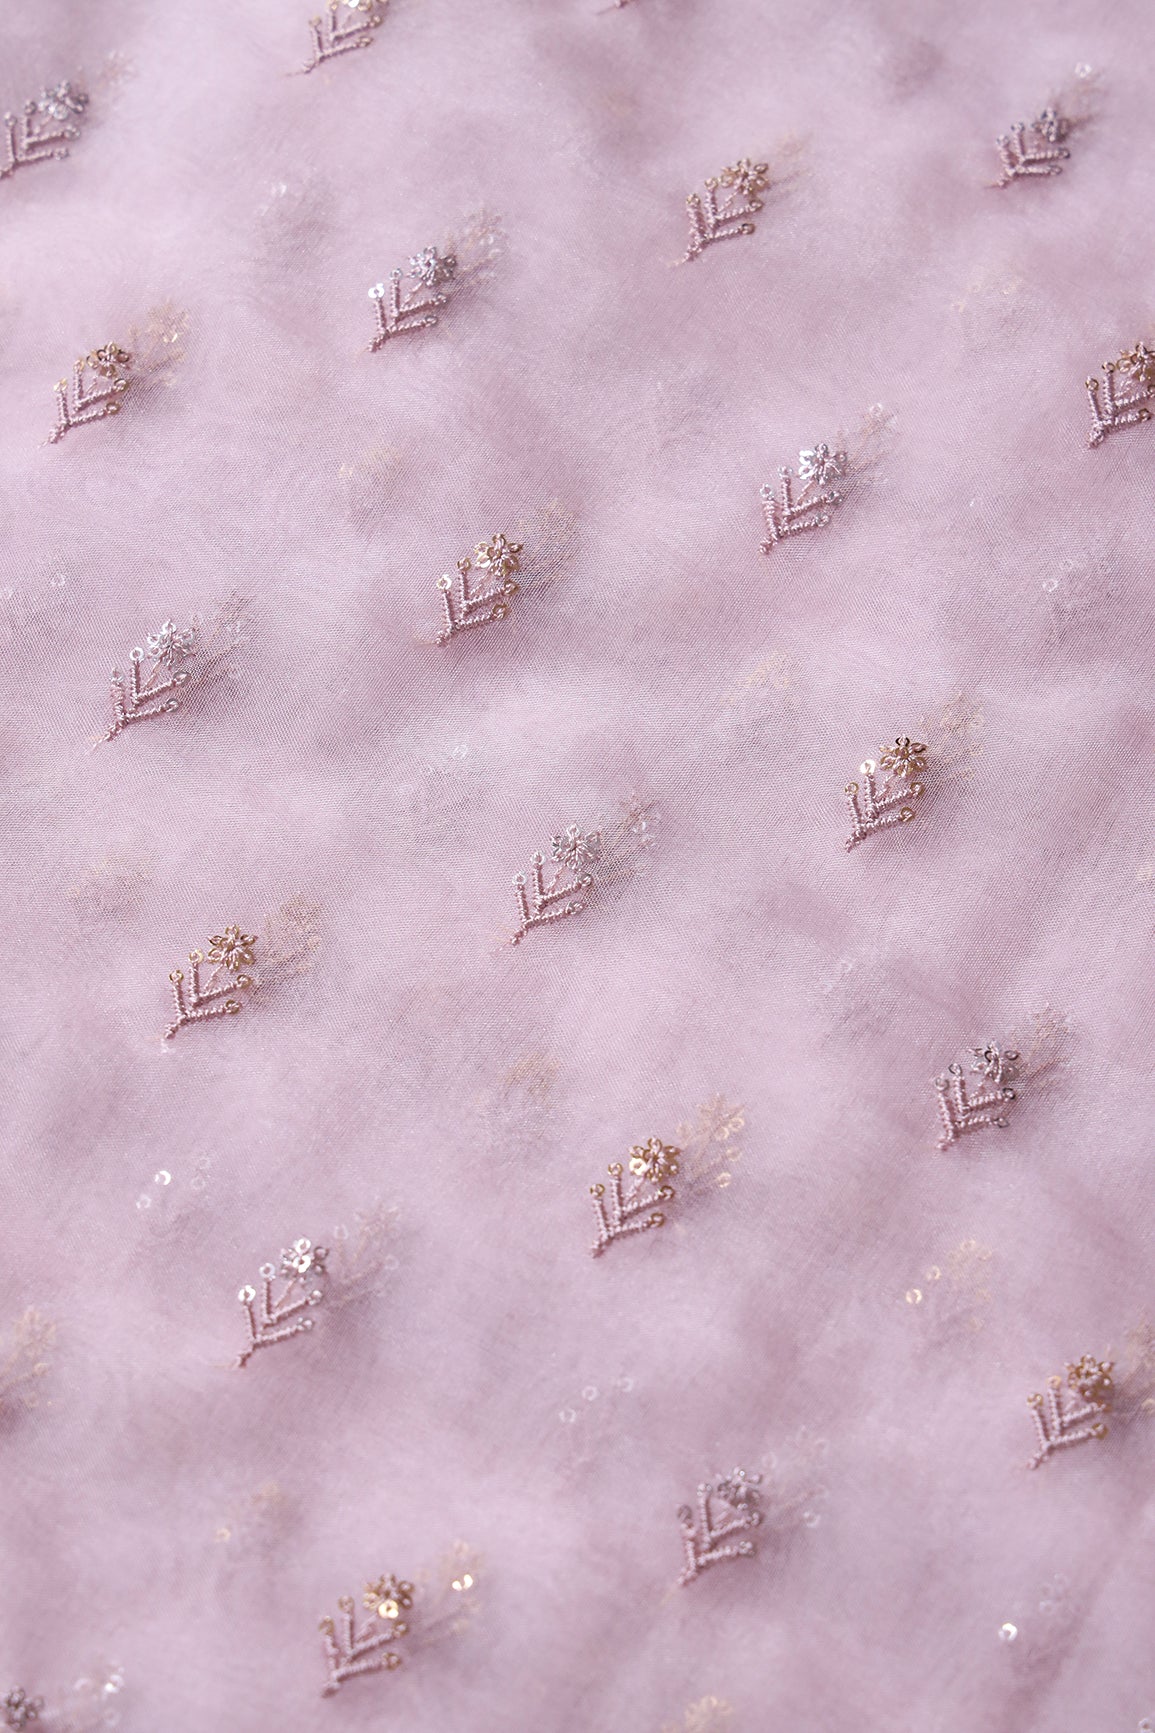 Gold And Silver Sequins Beautiful Small Floral Motif Embroidery Work On Pastel Pink Organza Fabric